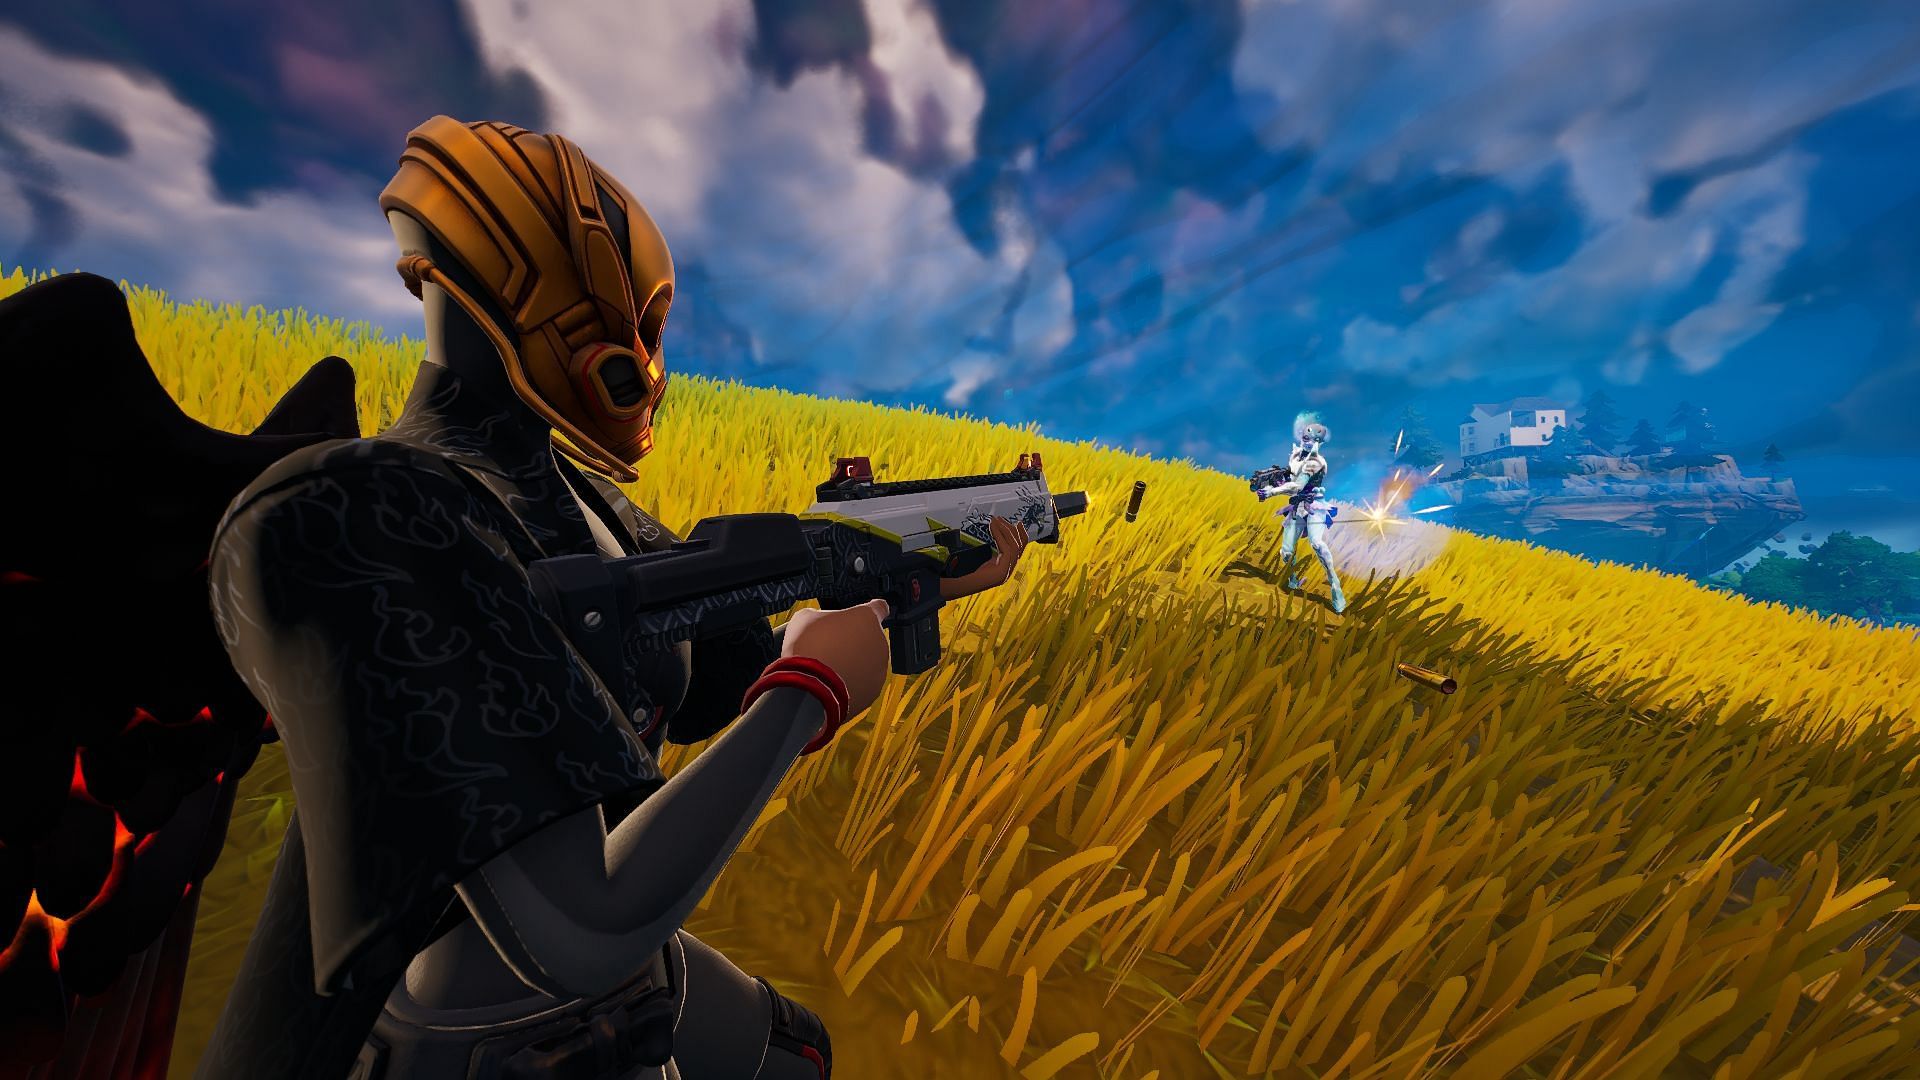 Get close to the opponent before opening fire (Image via Epic Games/Fortnite)